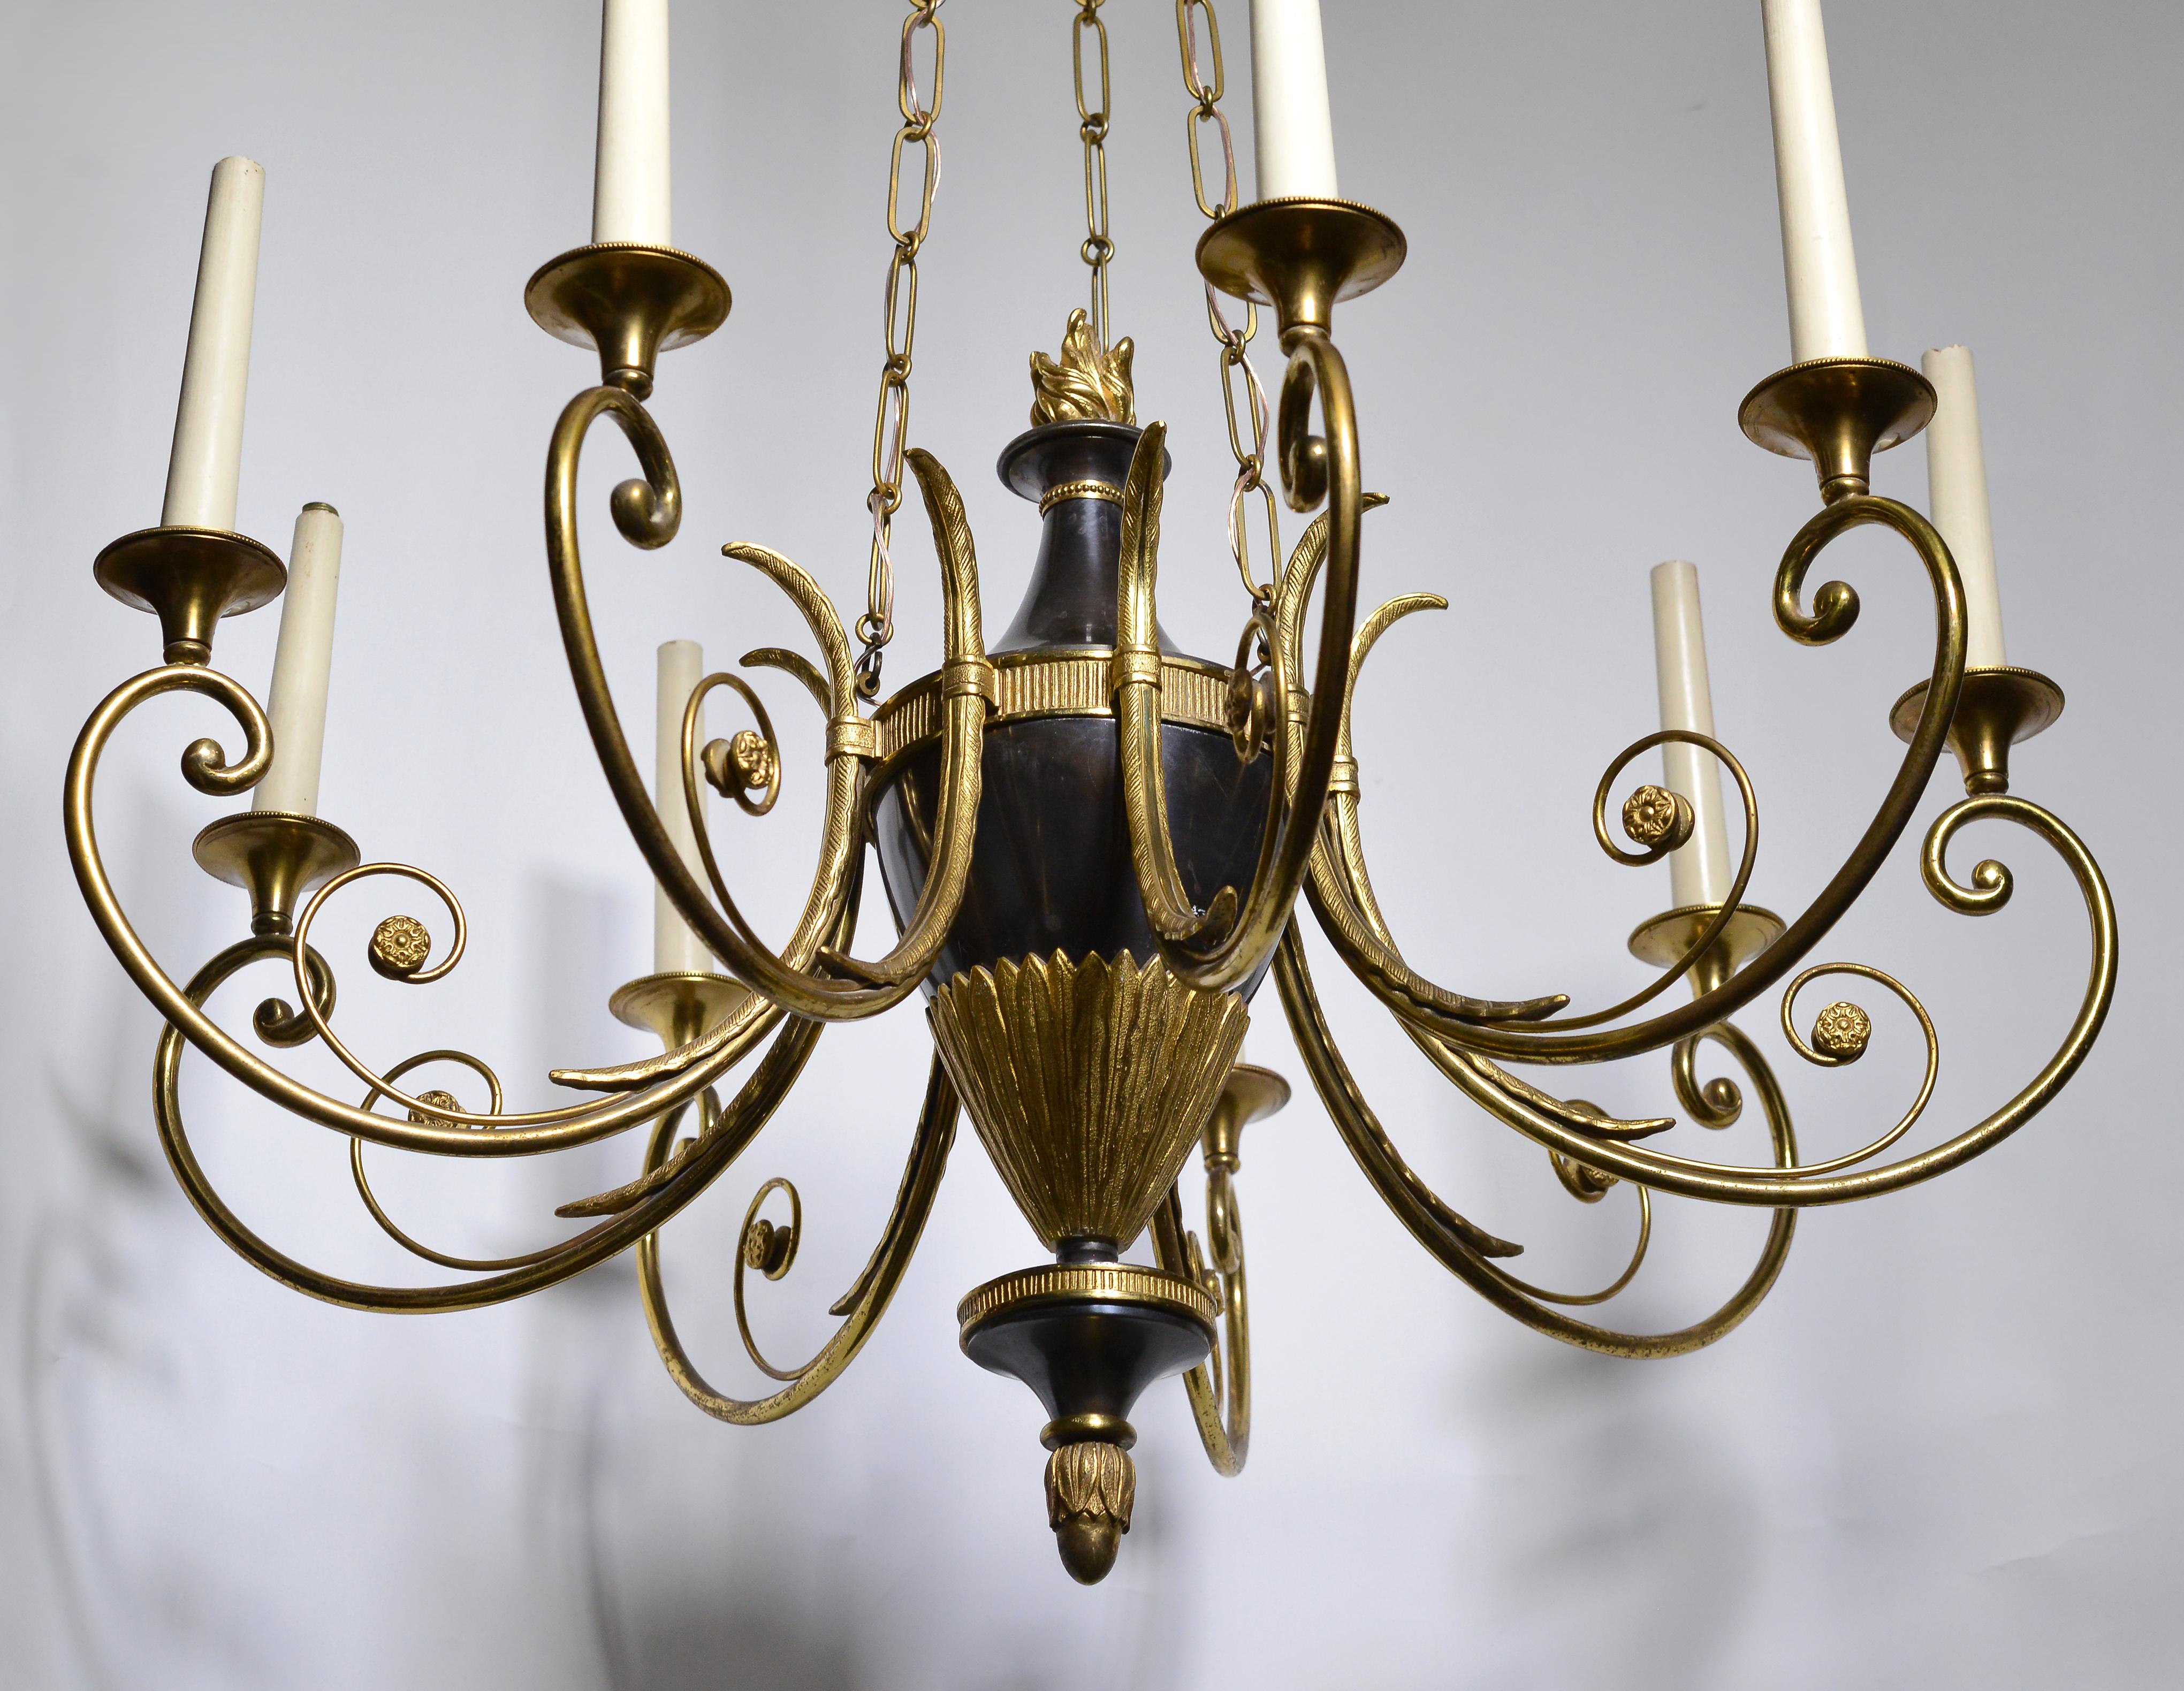 Empire Antique Chandelier Gilt Bronze and Oxidized 9 light early 20th century In Good Condition For Sale In Sweden, SE